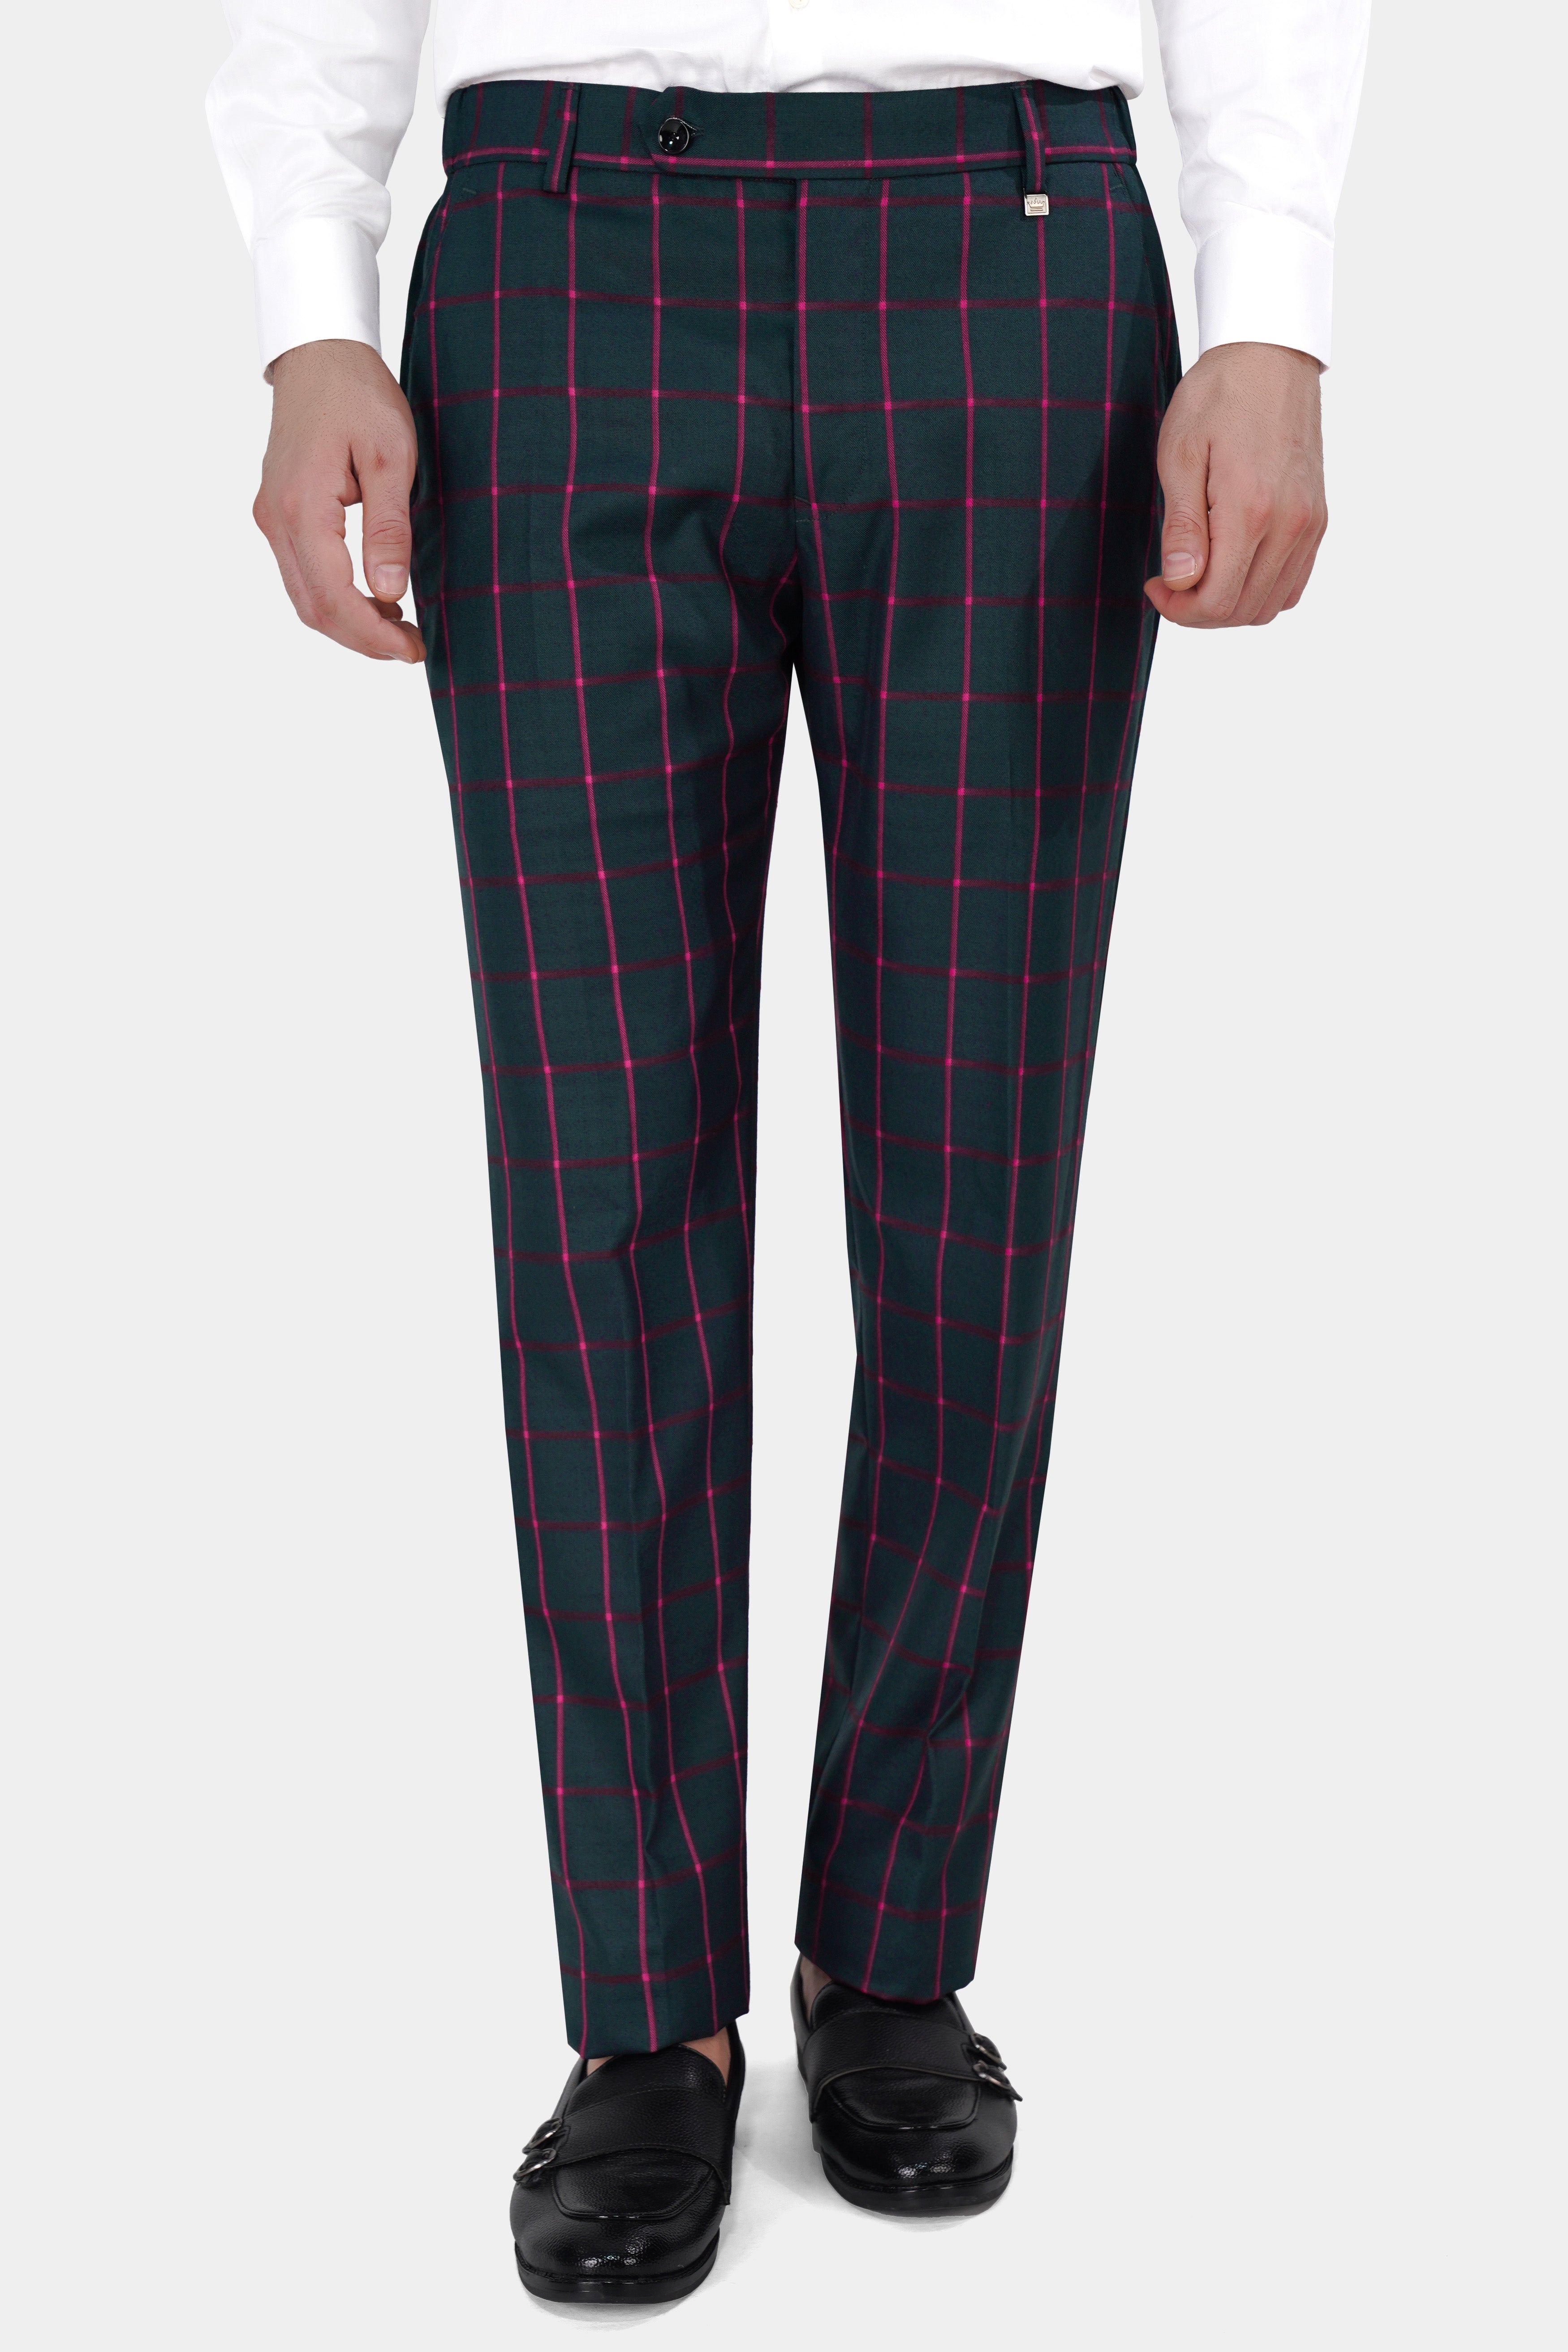 Outer Space Gray Checkered Wool Rich Pant T2843-SW-28, T2843-SW-30, T2843-SW-32, T2843-SW-34, T2843-SW-36, T2843-SW-38, T2843-SW-40, T2843-SW-42, T2843-SW-44